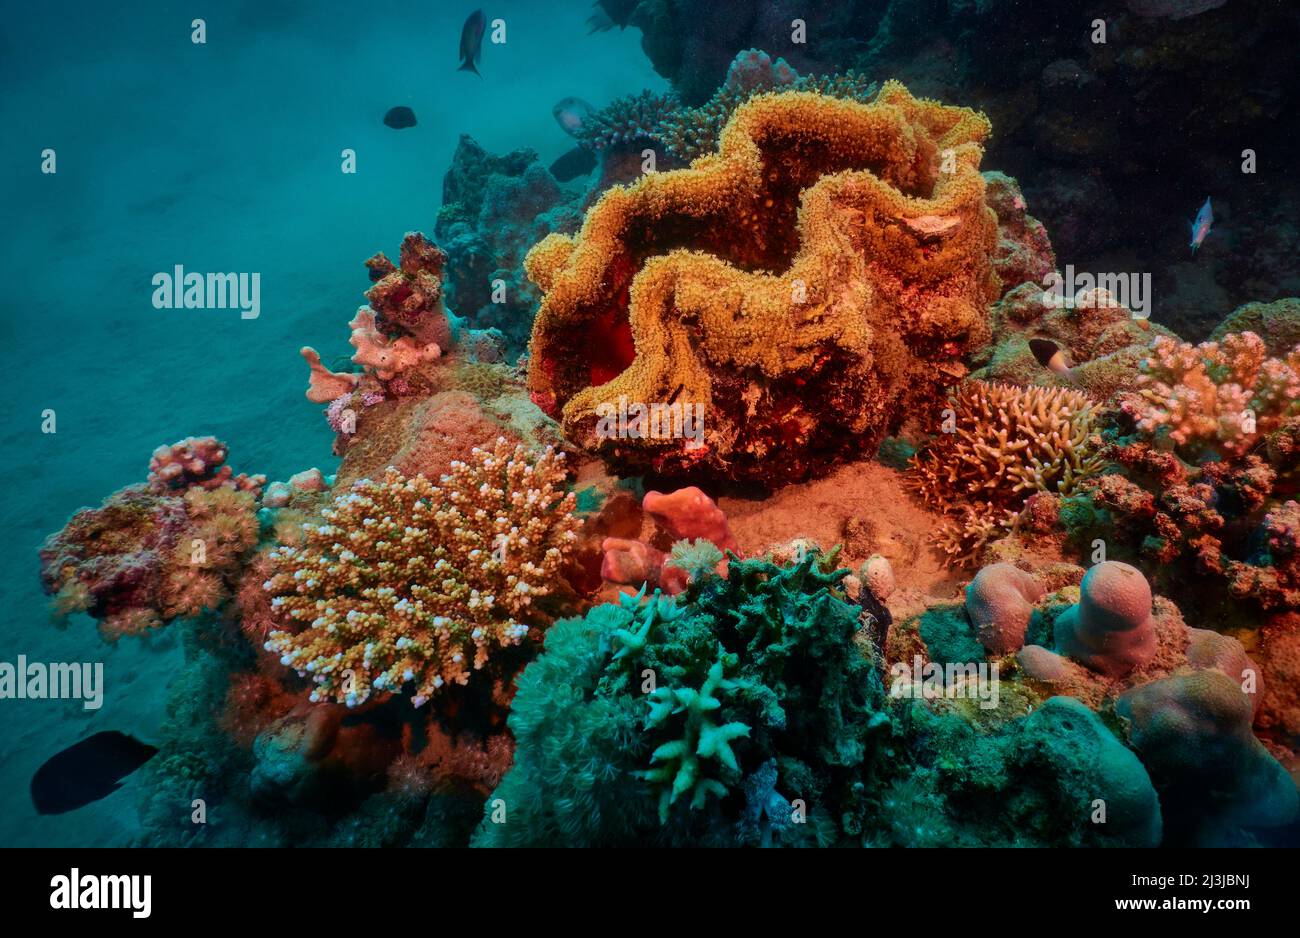 Scuba diving in the Red Sea, Makadi Bay, North Africa, Stock Photo